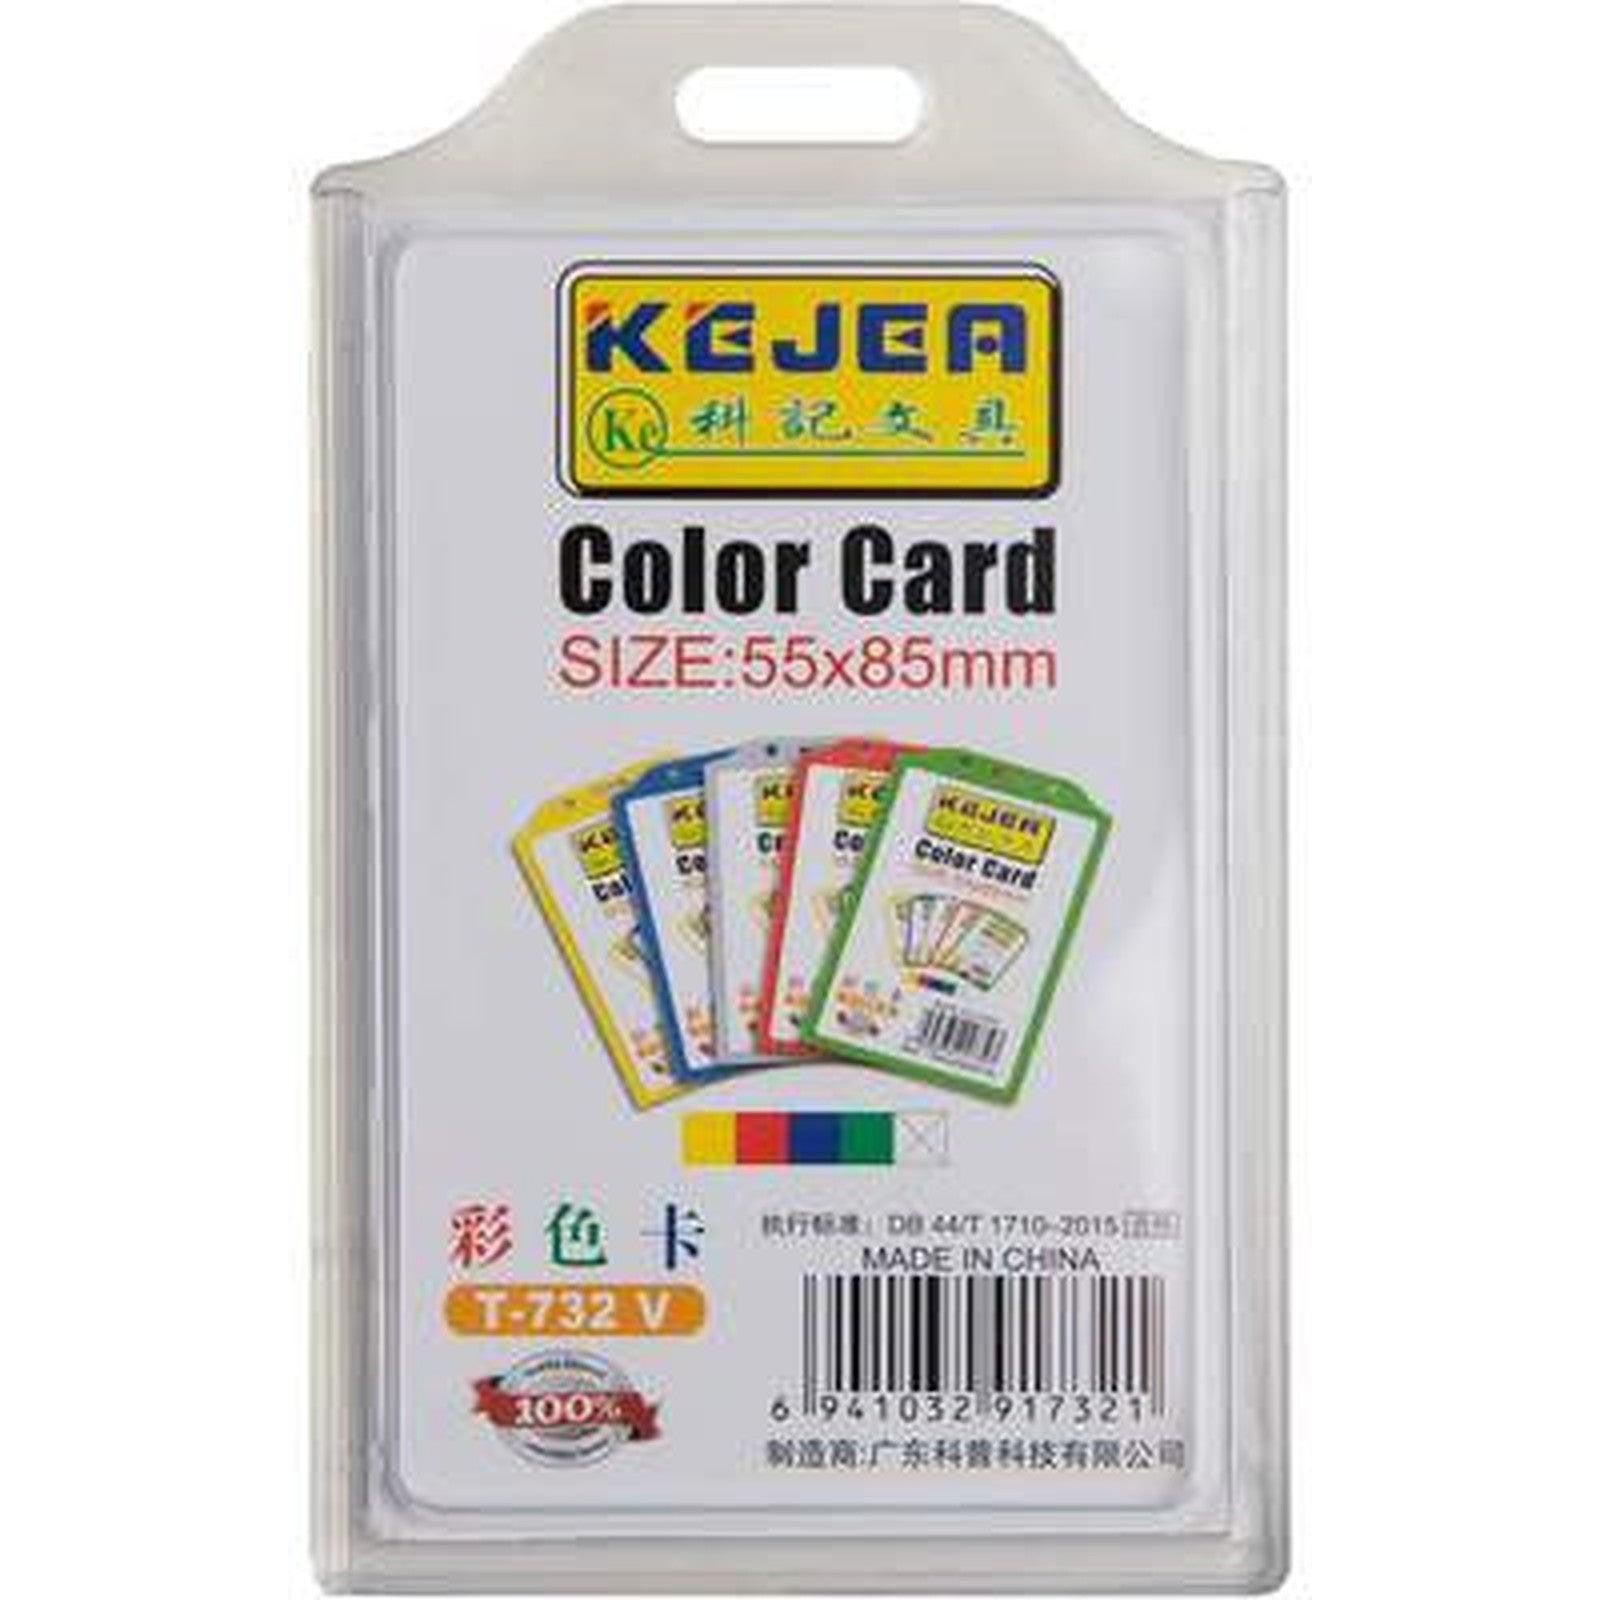 Acrylic Id Card Holder 5.5Cmx8.5Cm Clear Badge Holder T732V-Cards And Id-Other-Star Light Kuwait